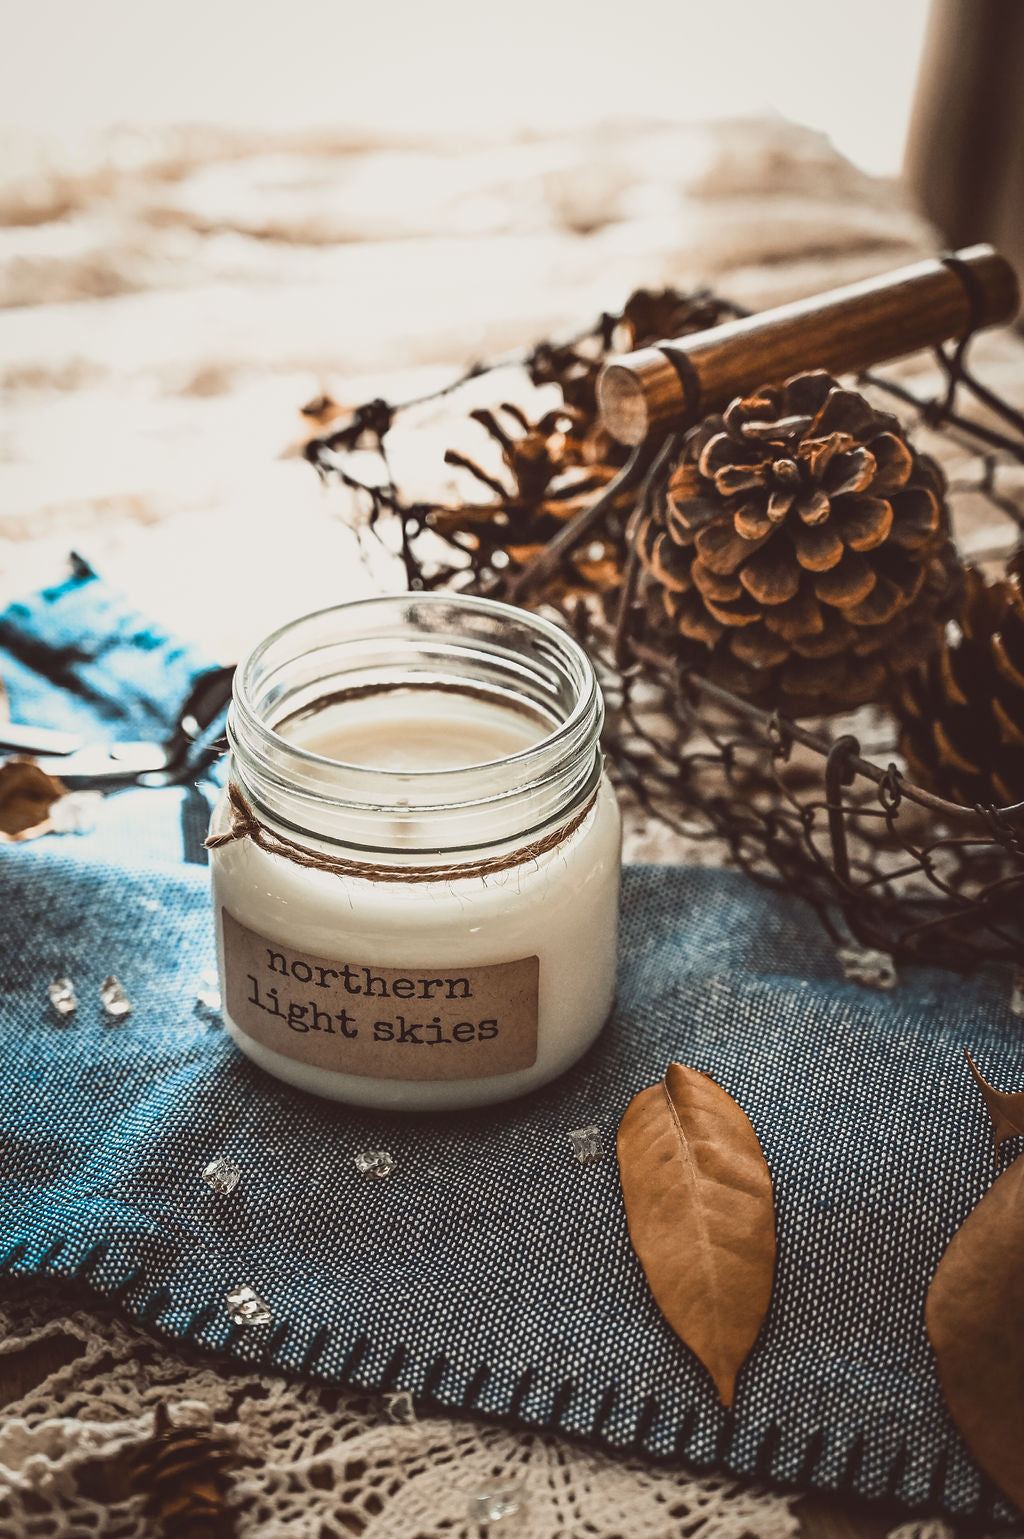 Northern Light Skies Soy Candle